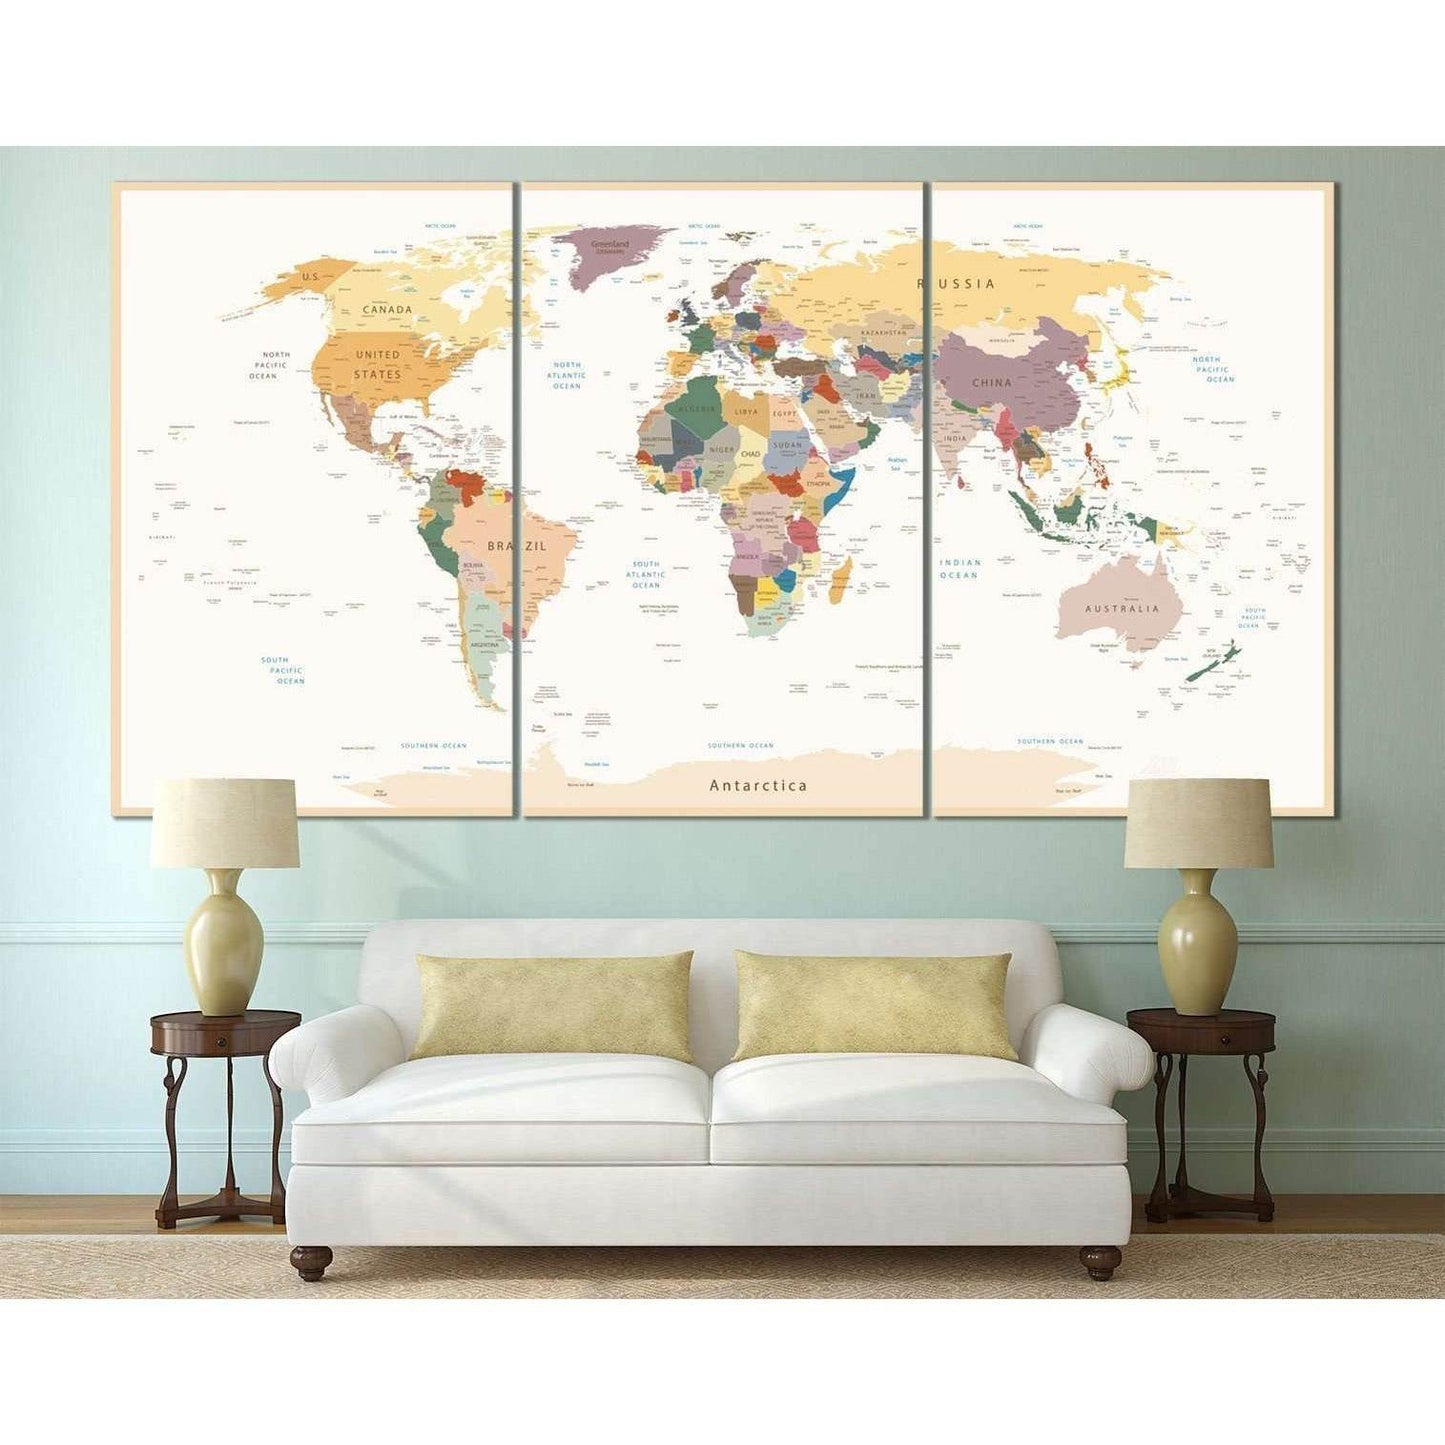 Detailed World Map for Office Wall DecorDecorate your walls with a stunning Detailed World Map Canvas Art Print from the world's largest art gallery. Choose from thousands of Detailed World Map artworks with various sizing options. Choose your perfect art